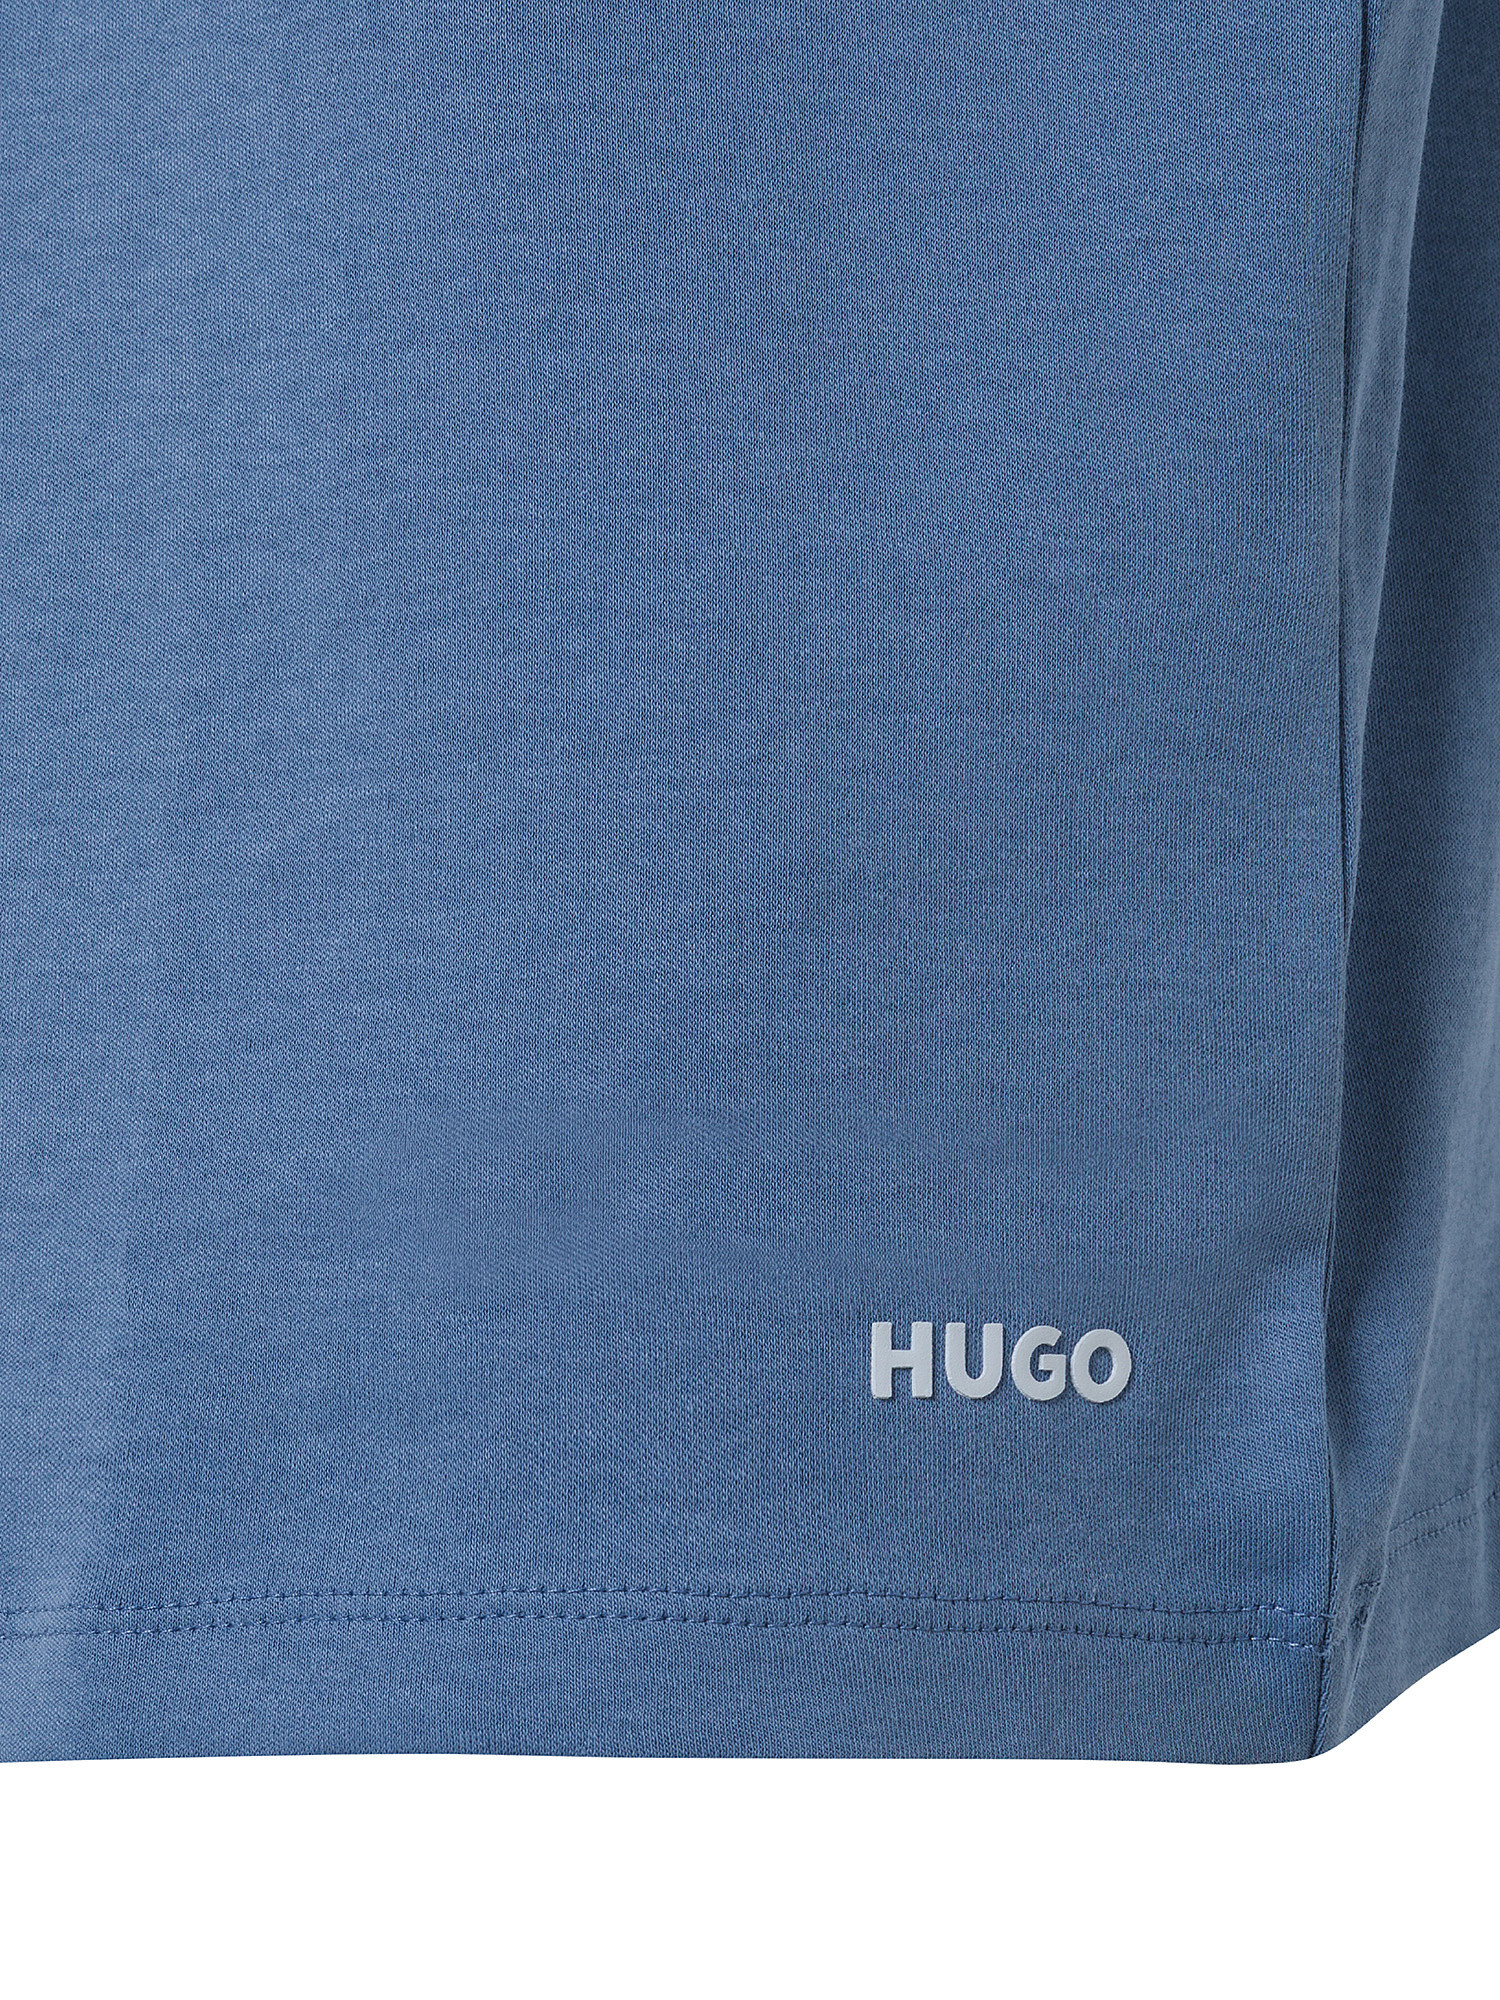 Hugo - T-shirt con stampa logo in cotone, Azzurro, large image number 2